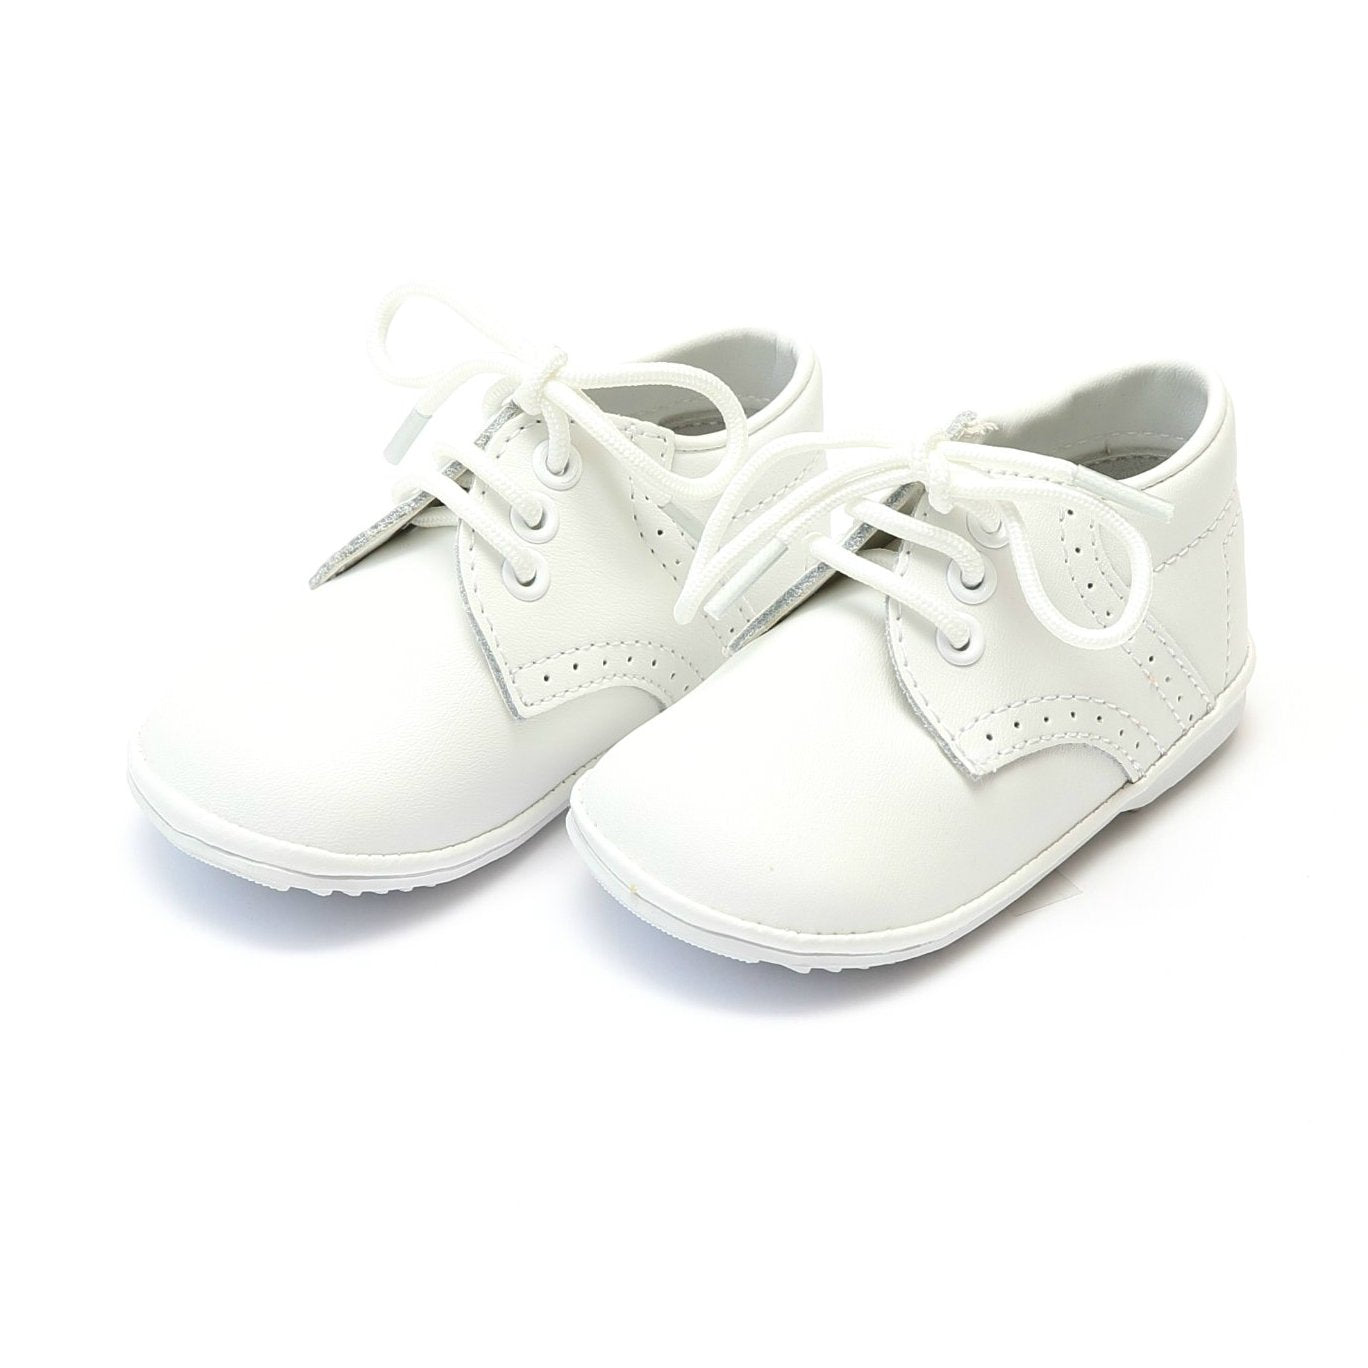 white leather baby boy's lace-up boot from L'Amour Shoes available at Threadfare